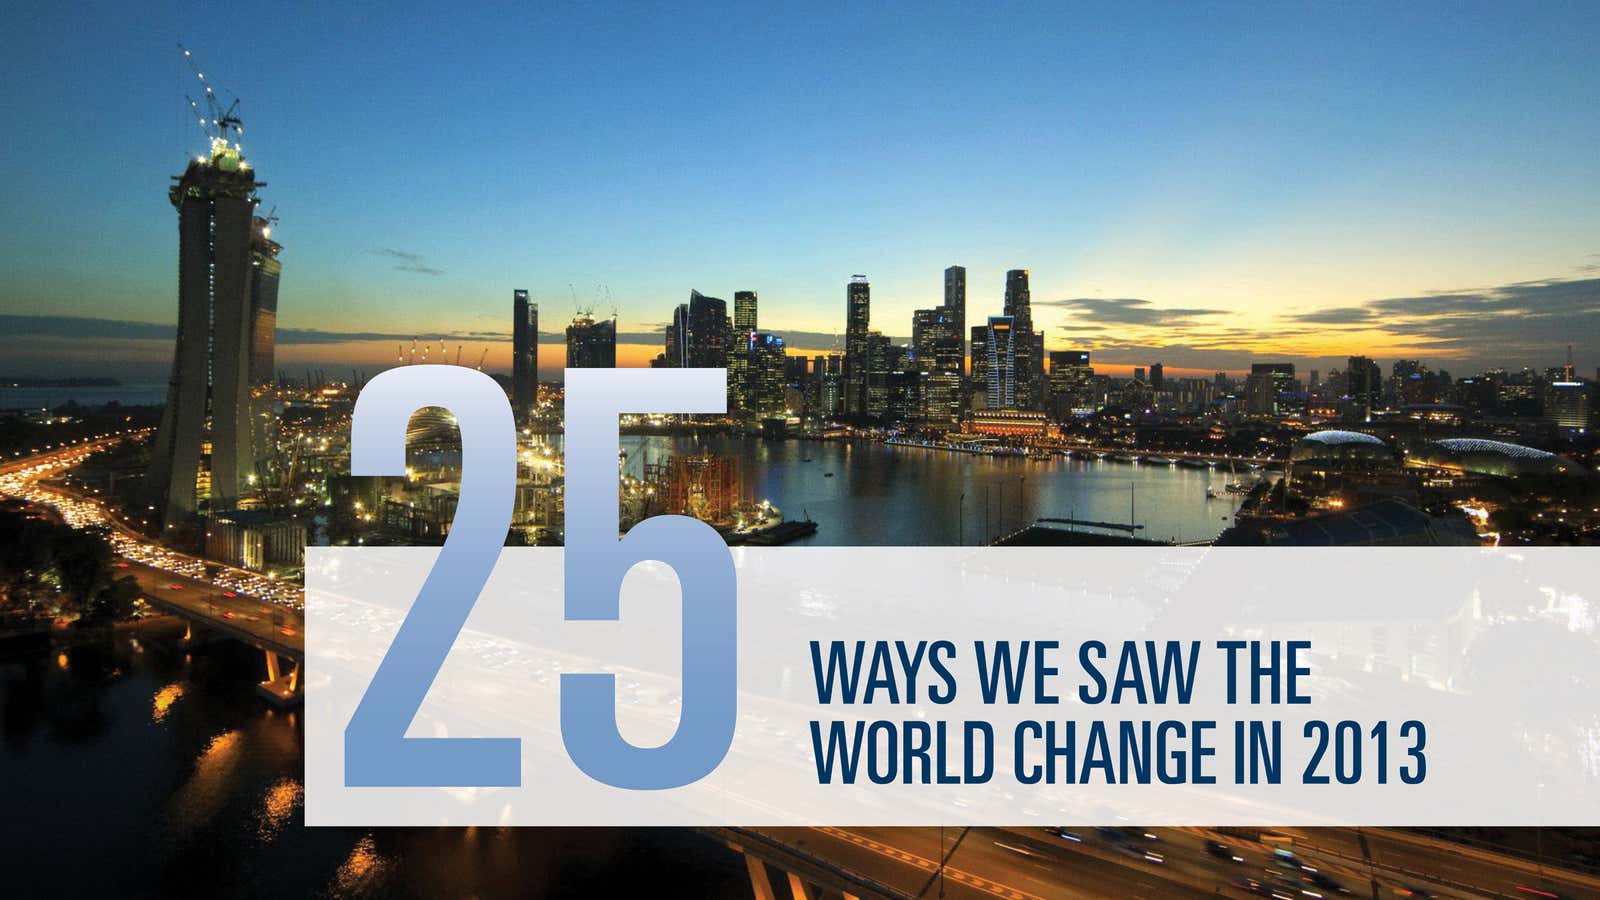 25 ways we saw the world change in 2013